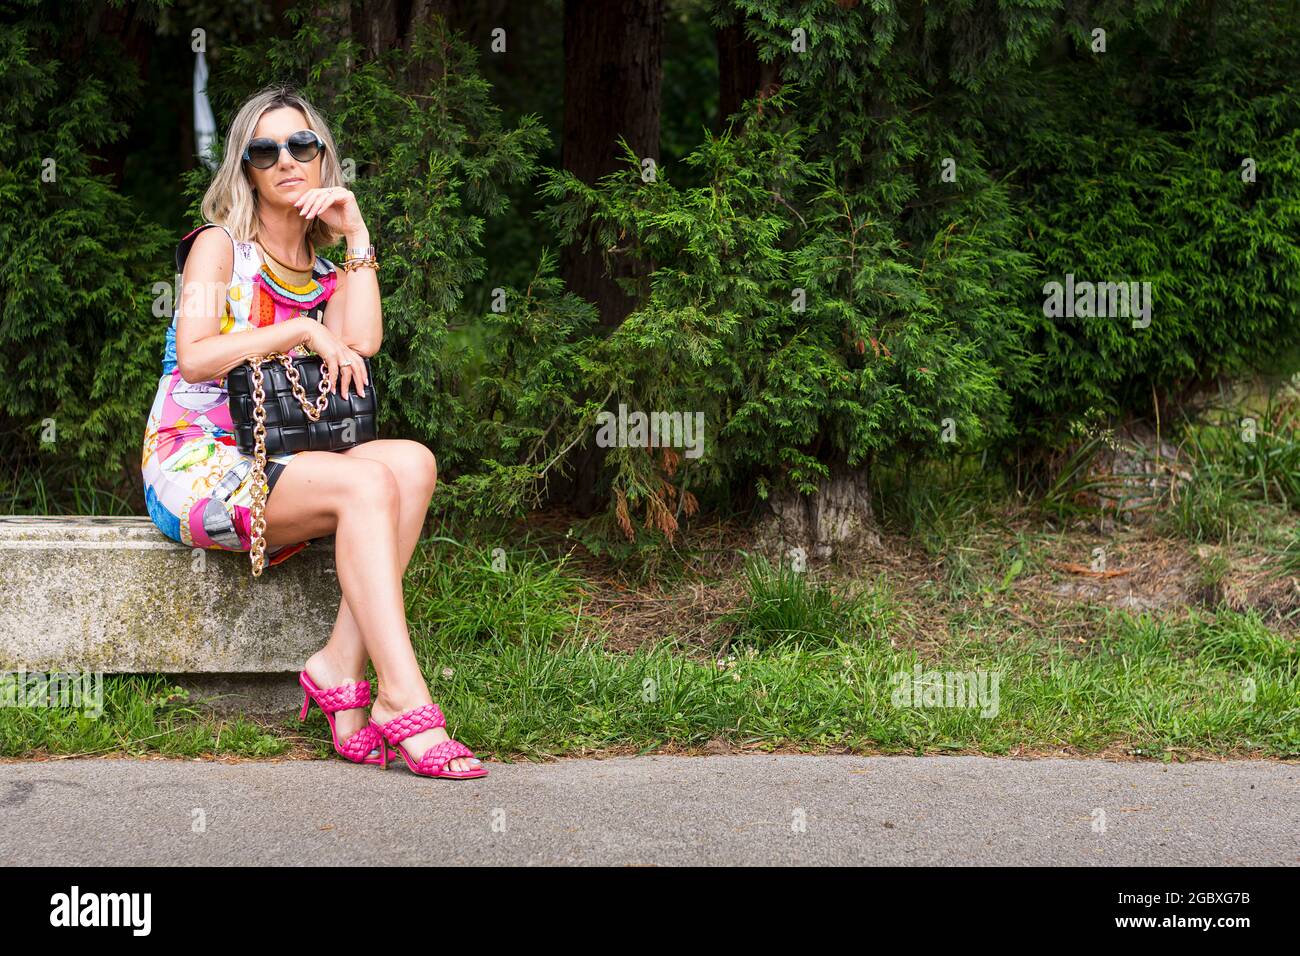 Blonde model sitting on stone bench in a colorful dress.The woman carries a black bag in her hand, sunglasses and pink sandals.The photograph was shot Stock Photo